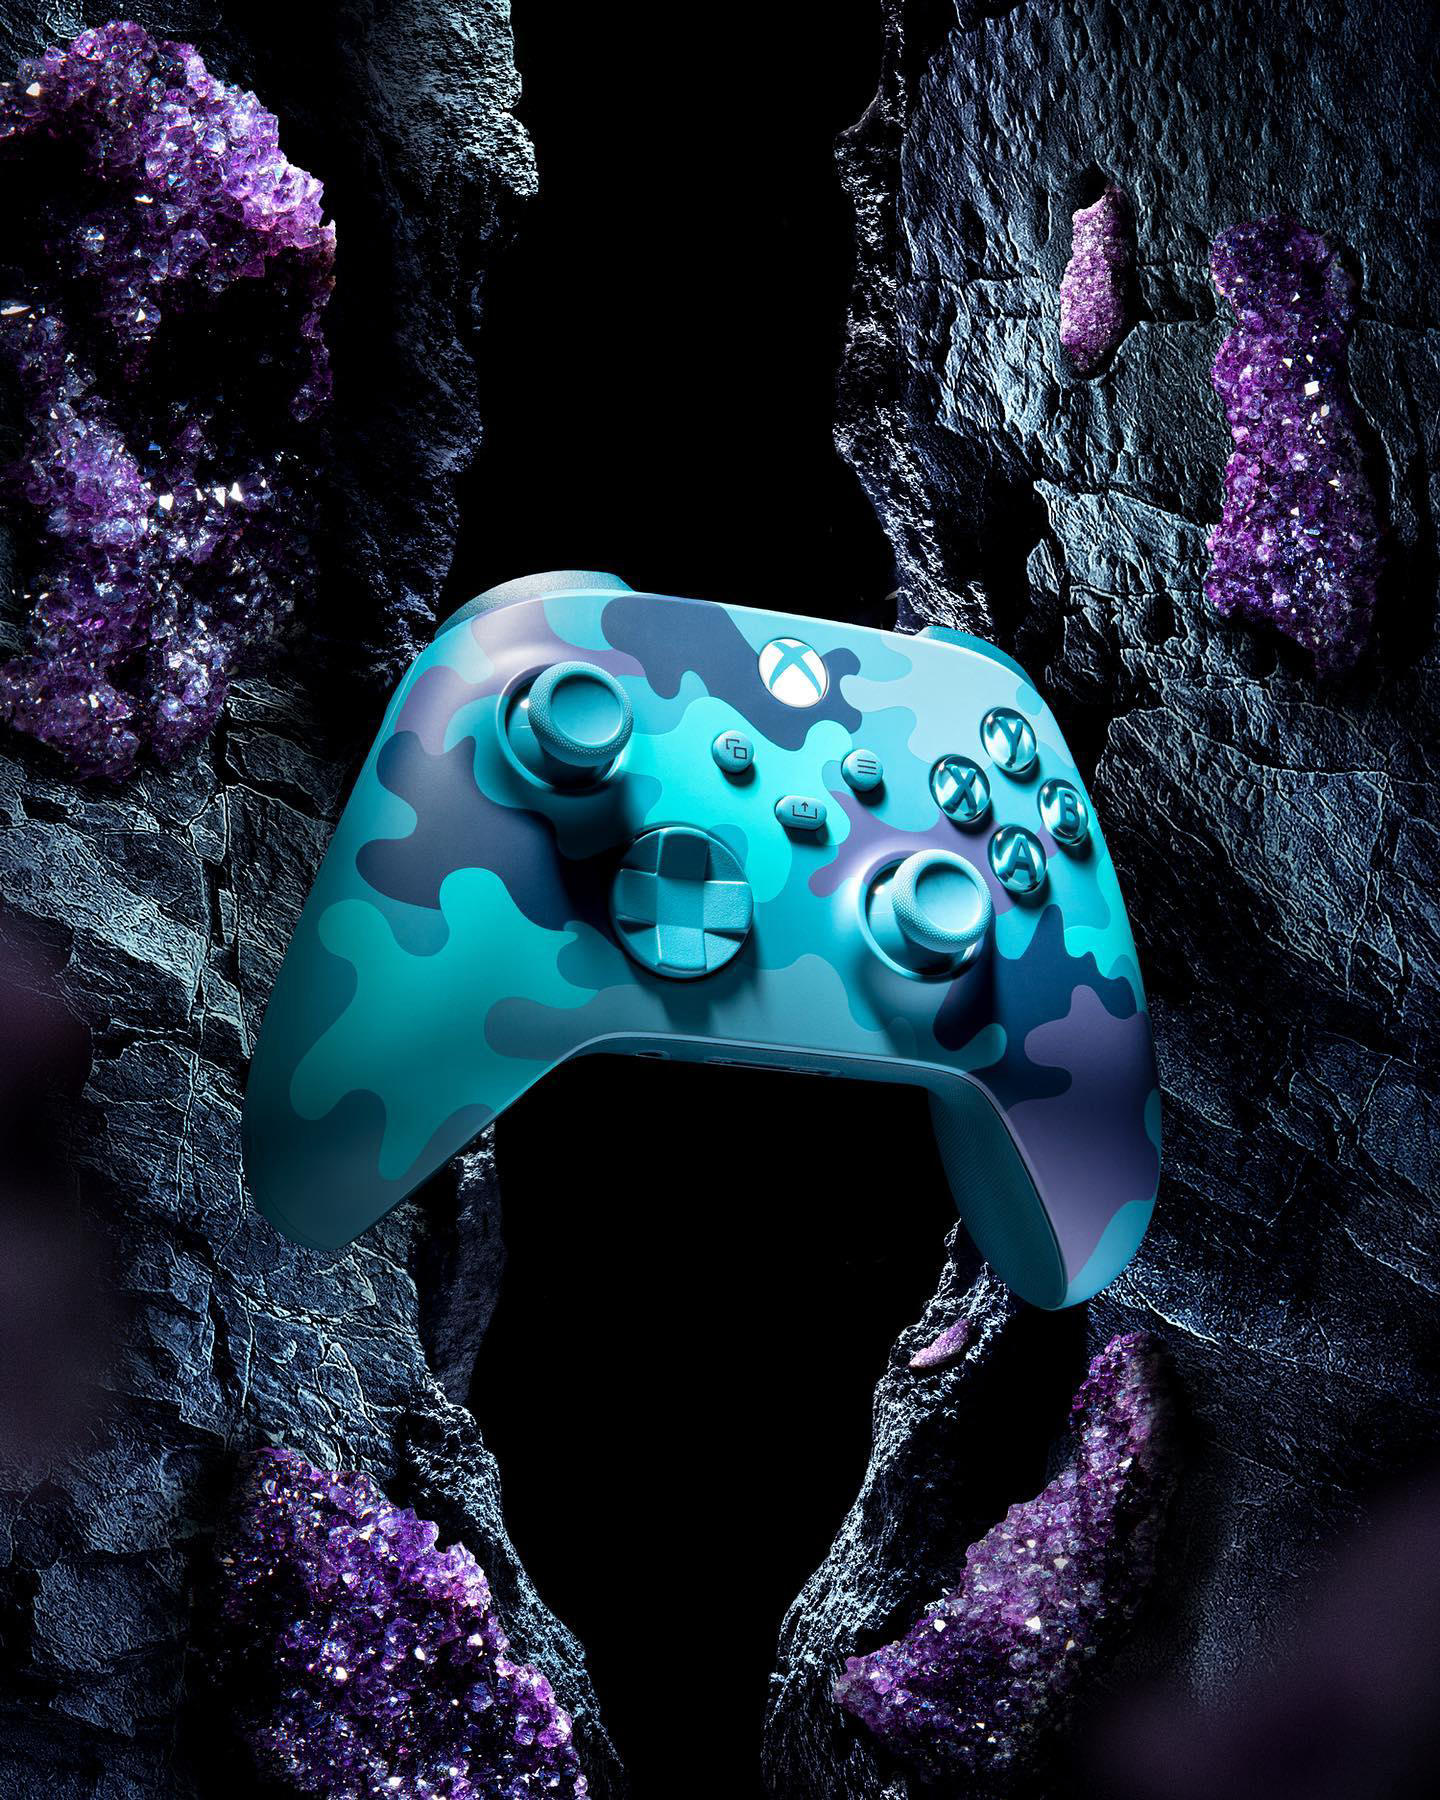 Xbox - Who says mineral and camo don't go well together